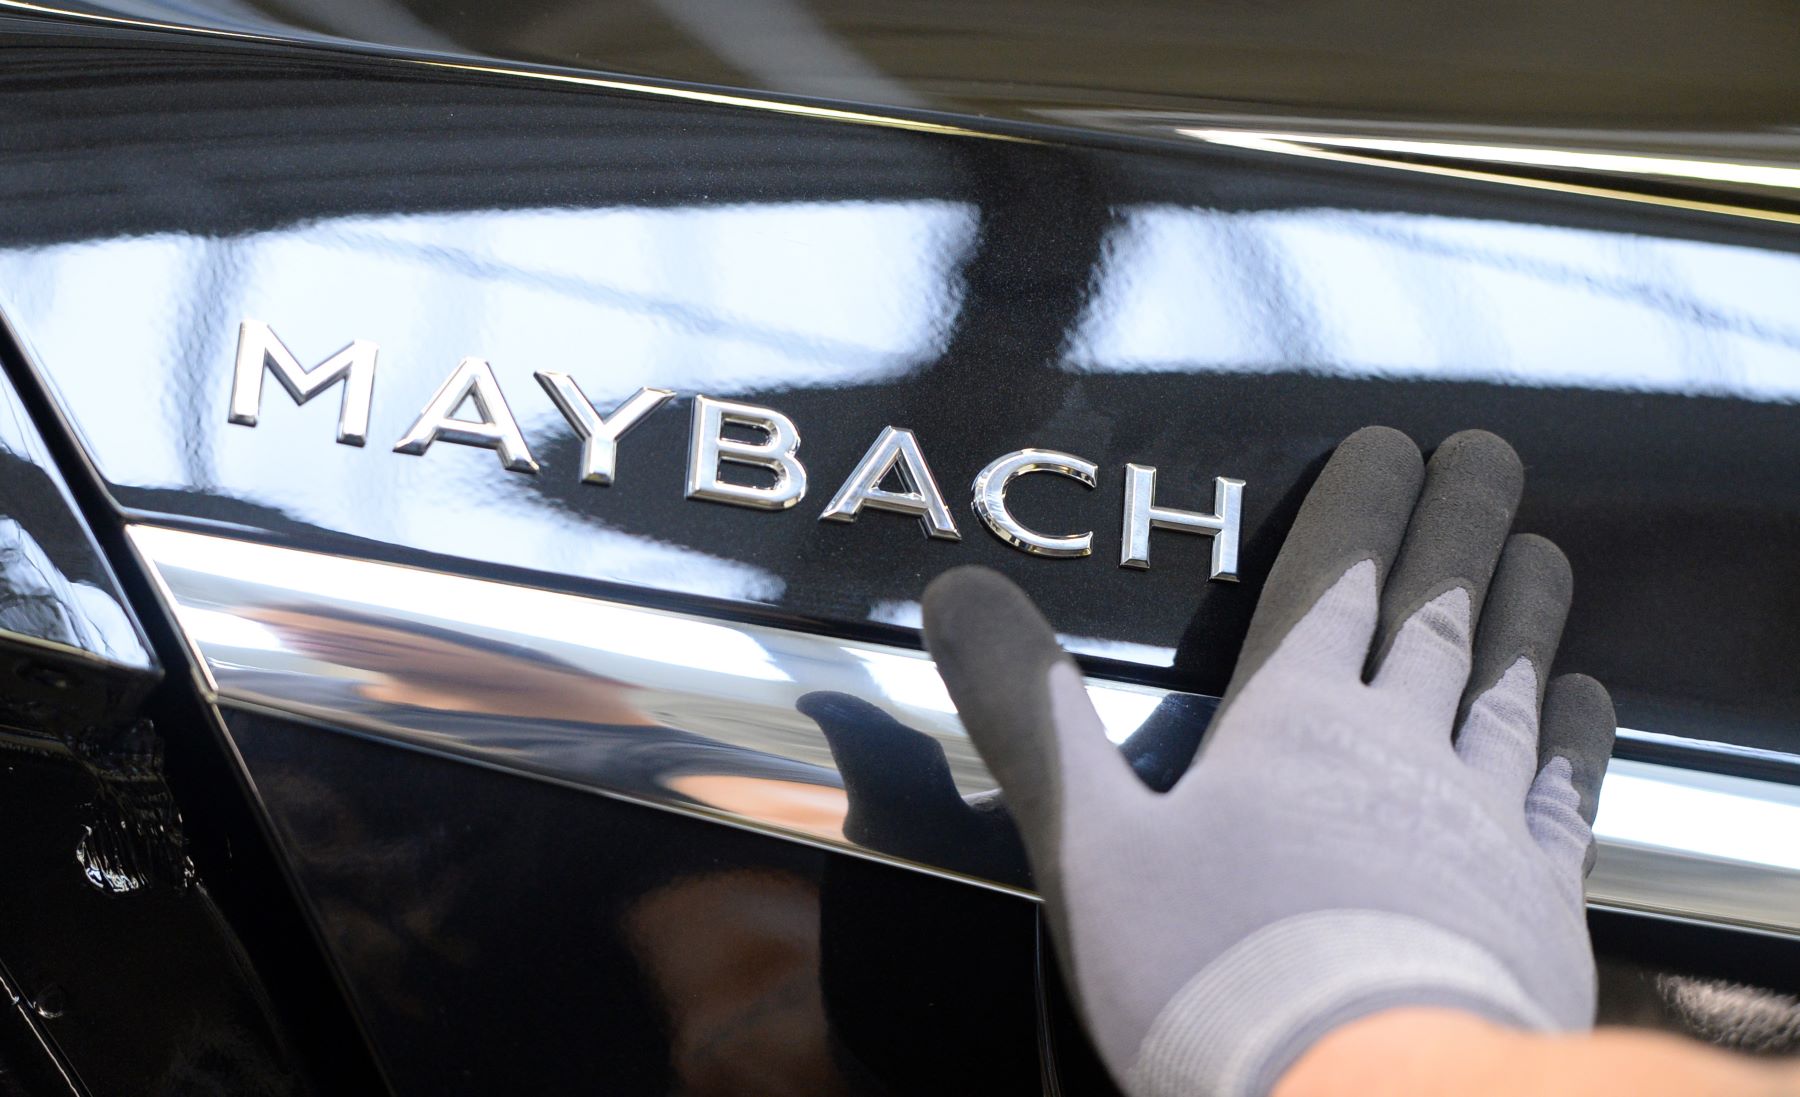 Maybach badging attached to a Mercedes-Benz model during vehicle assembly in Sinfelfingen, Germany